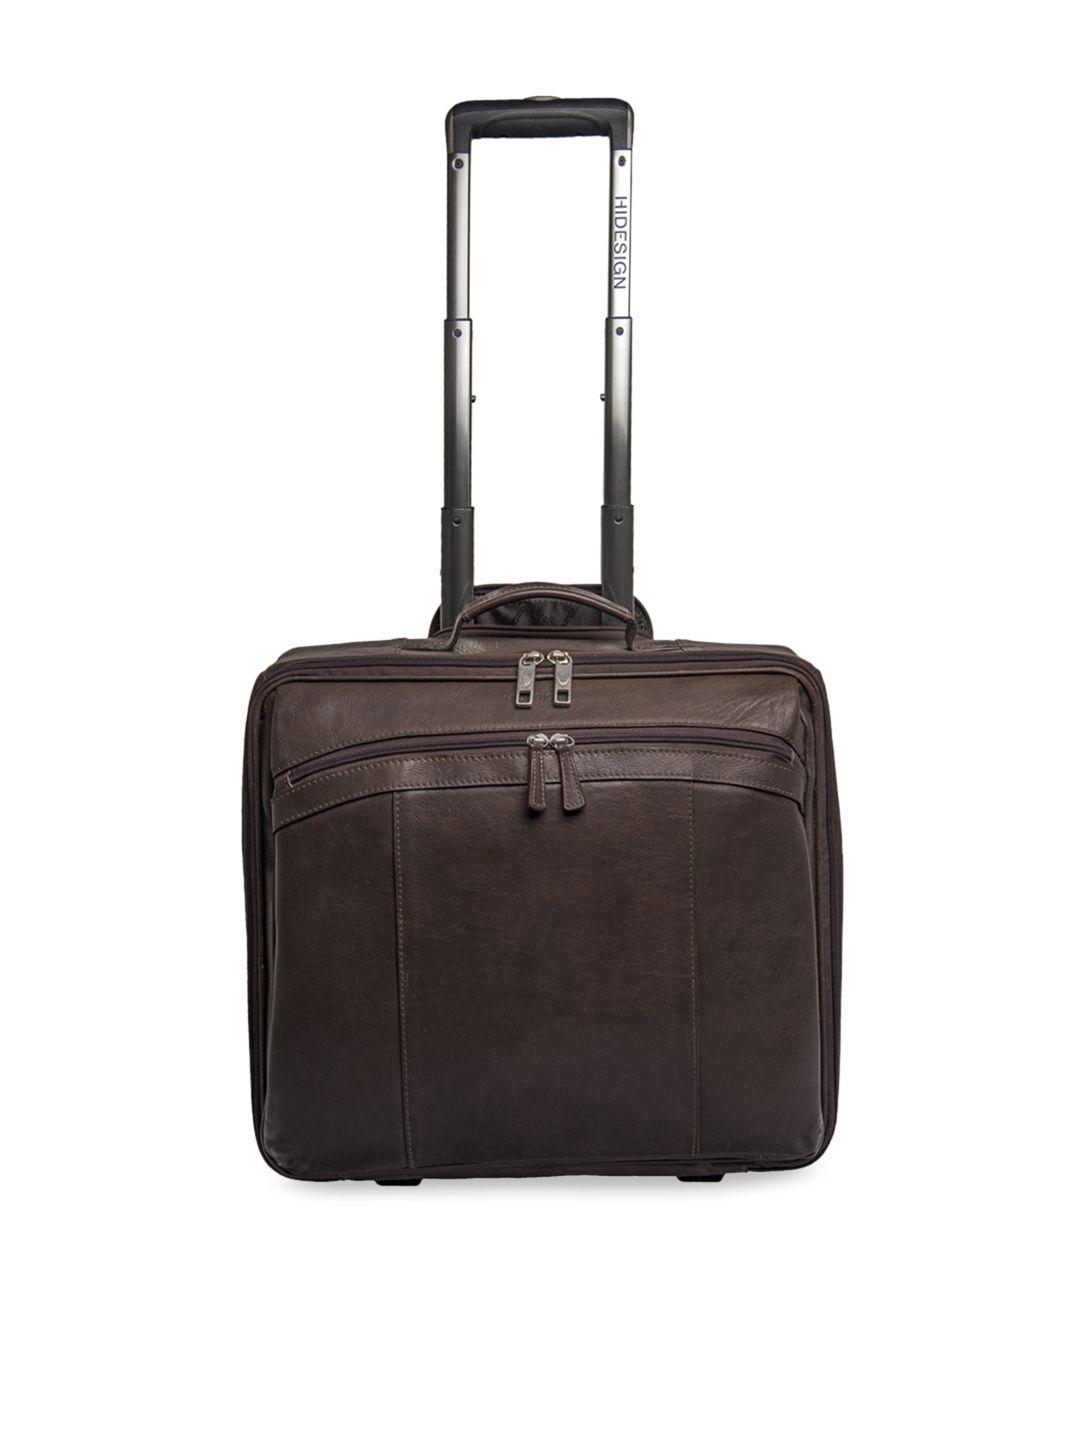 hidesign-unisex-coffee-brown-solid-leather-cabin-trolley-suitcase